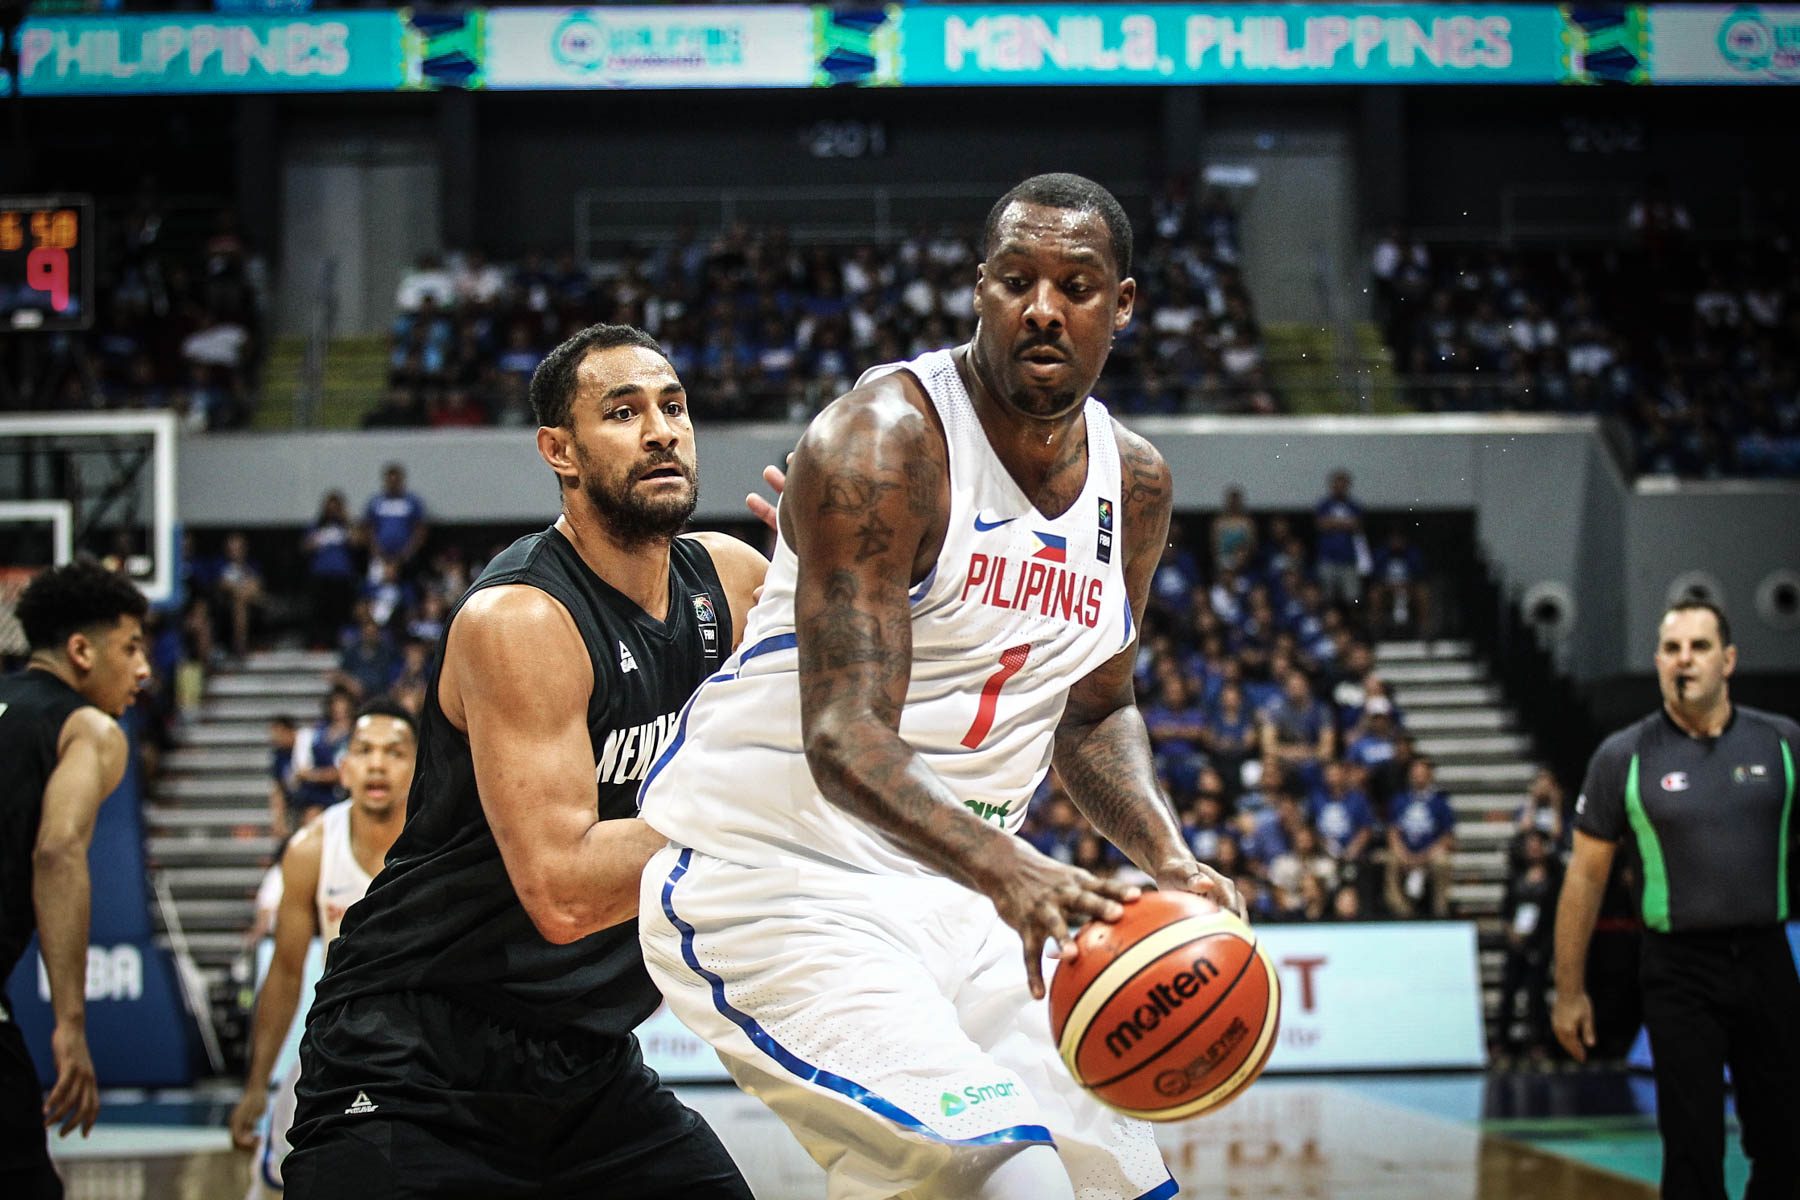 Blatche’s arrival delayed with birth of child, Reyes upset